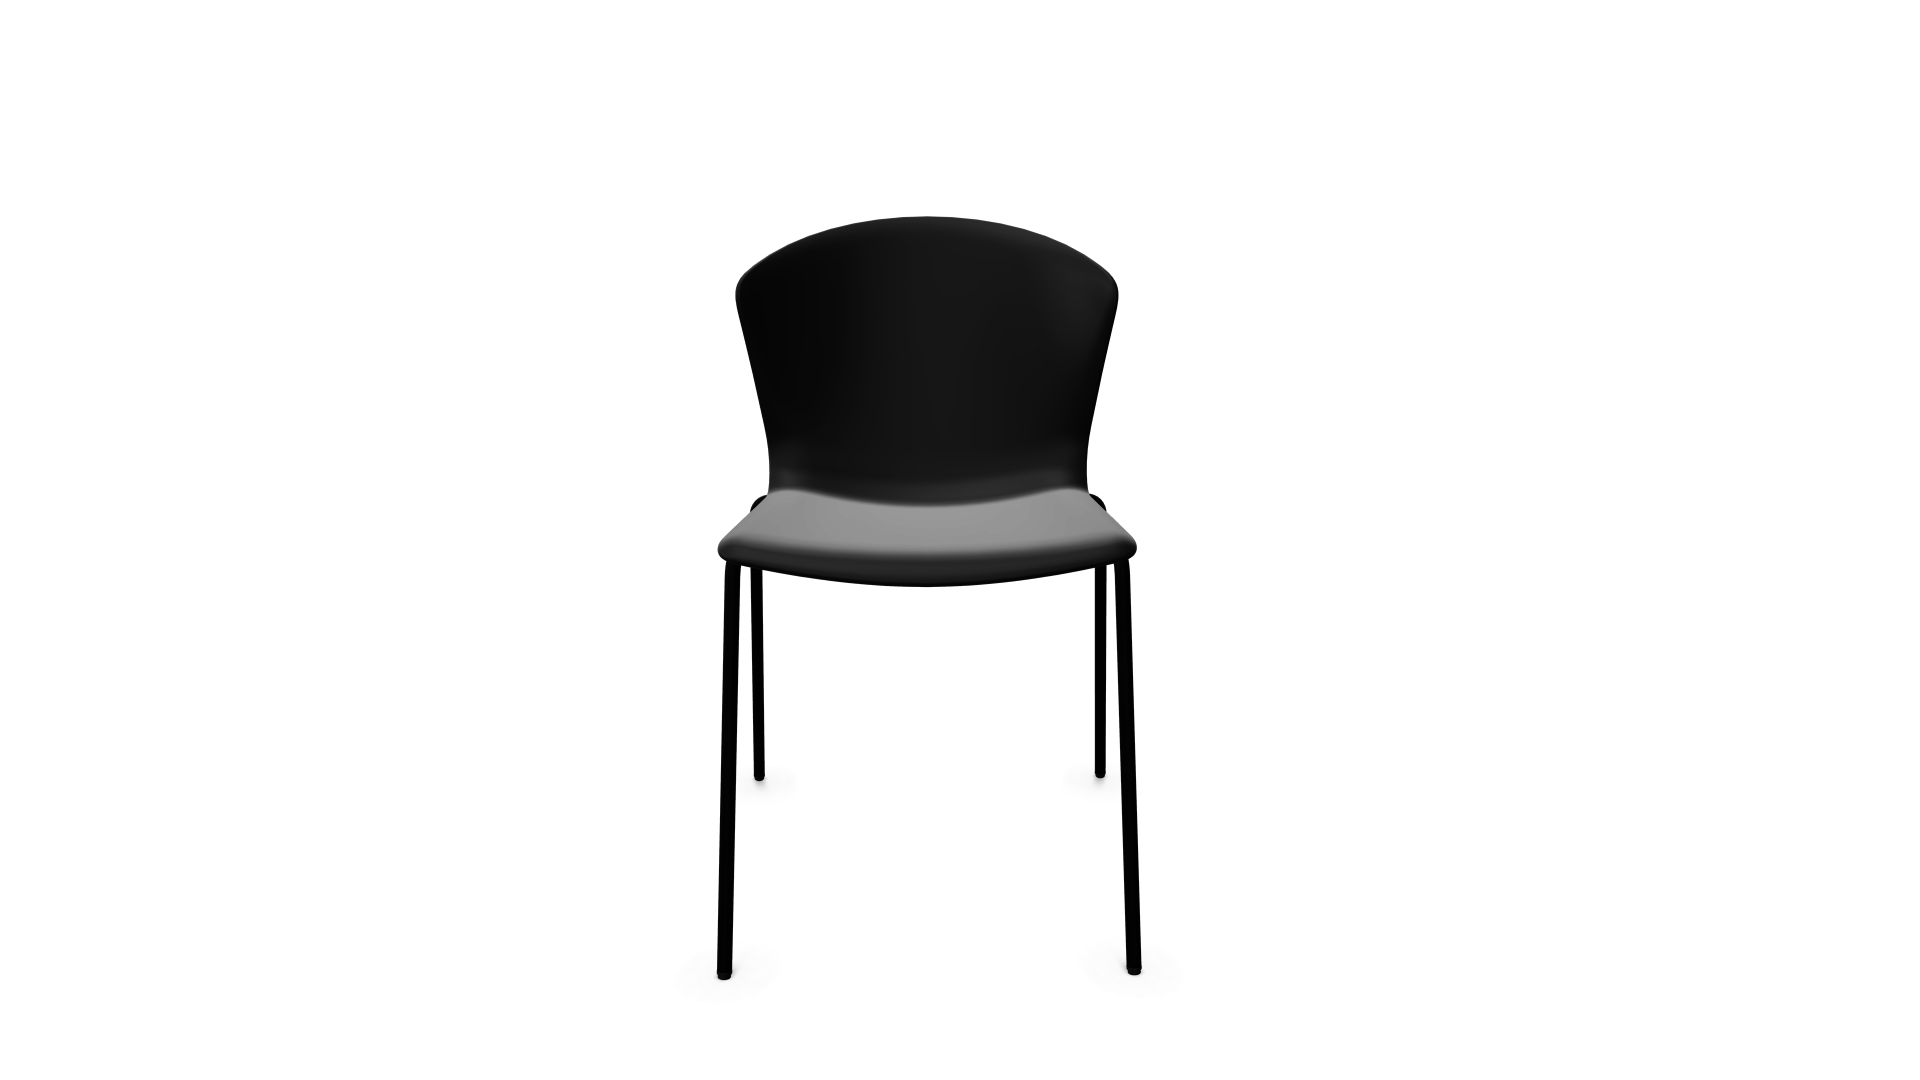 Whass Chair Home, Office, Garden online marketplace